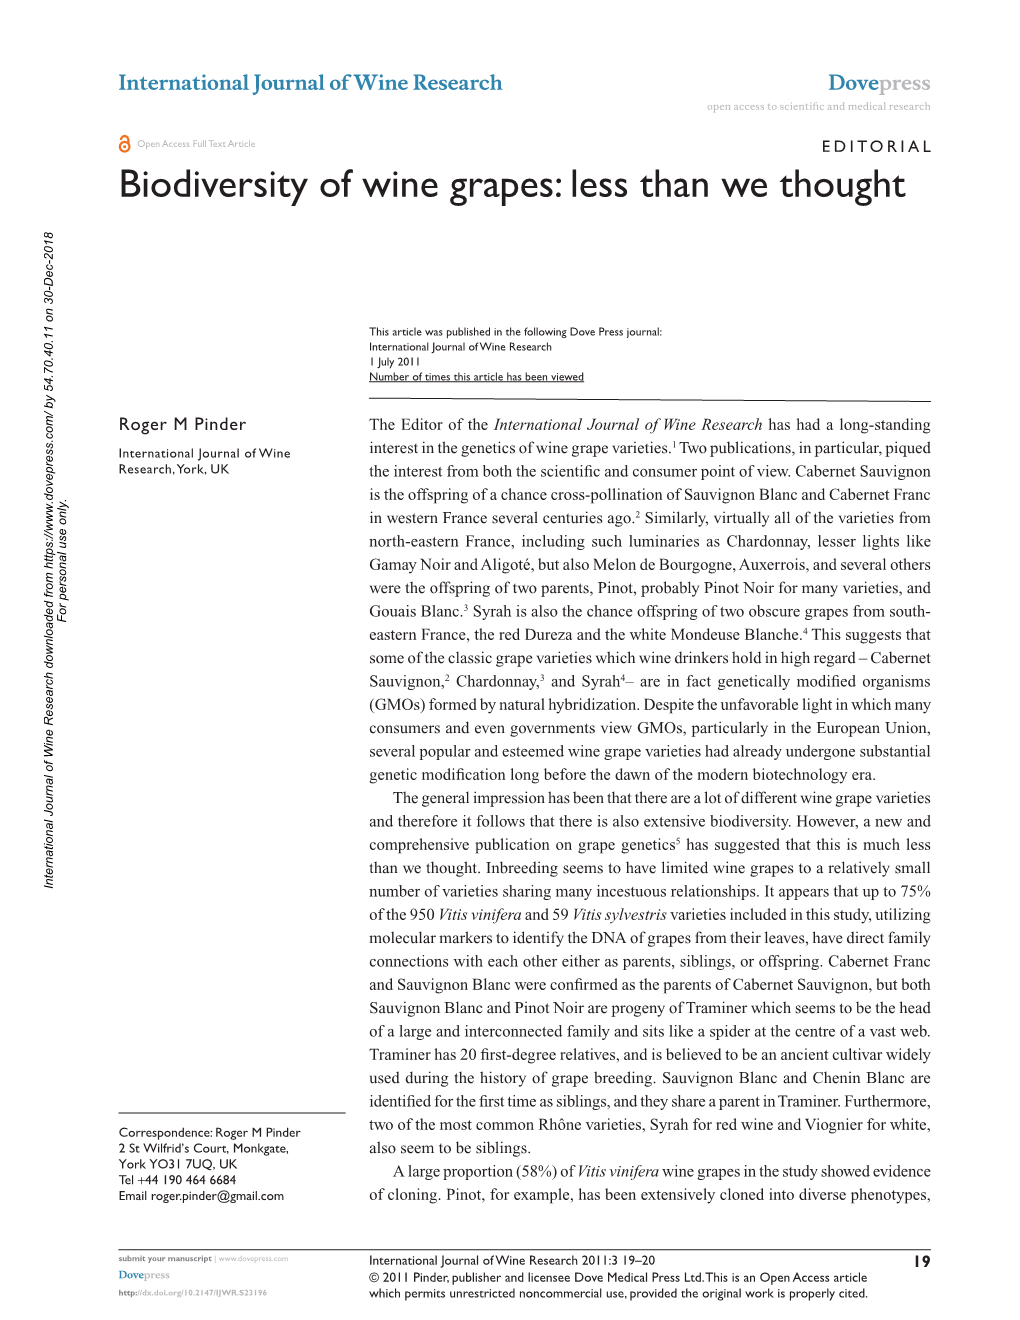 Biodiversity of Wine Grapes: Less Than We Thought